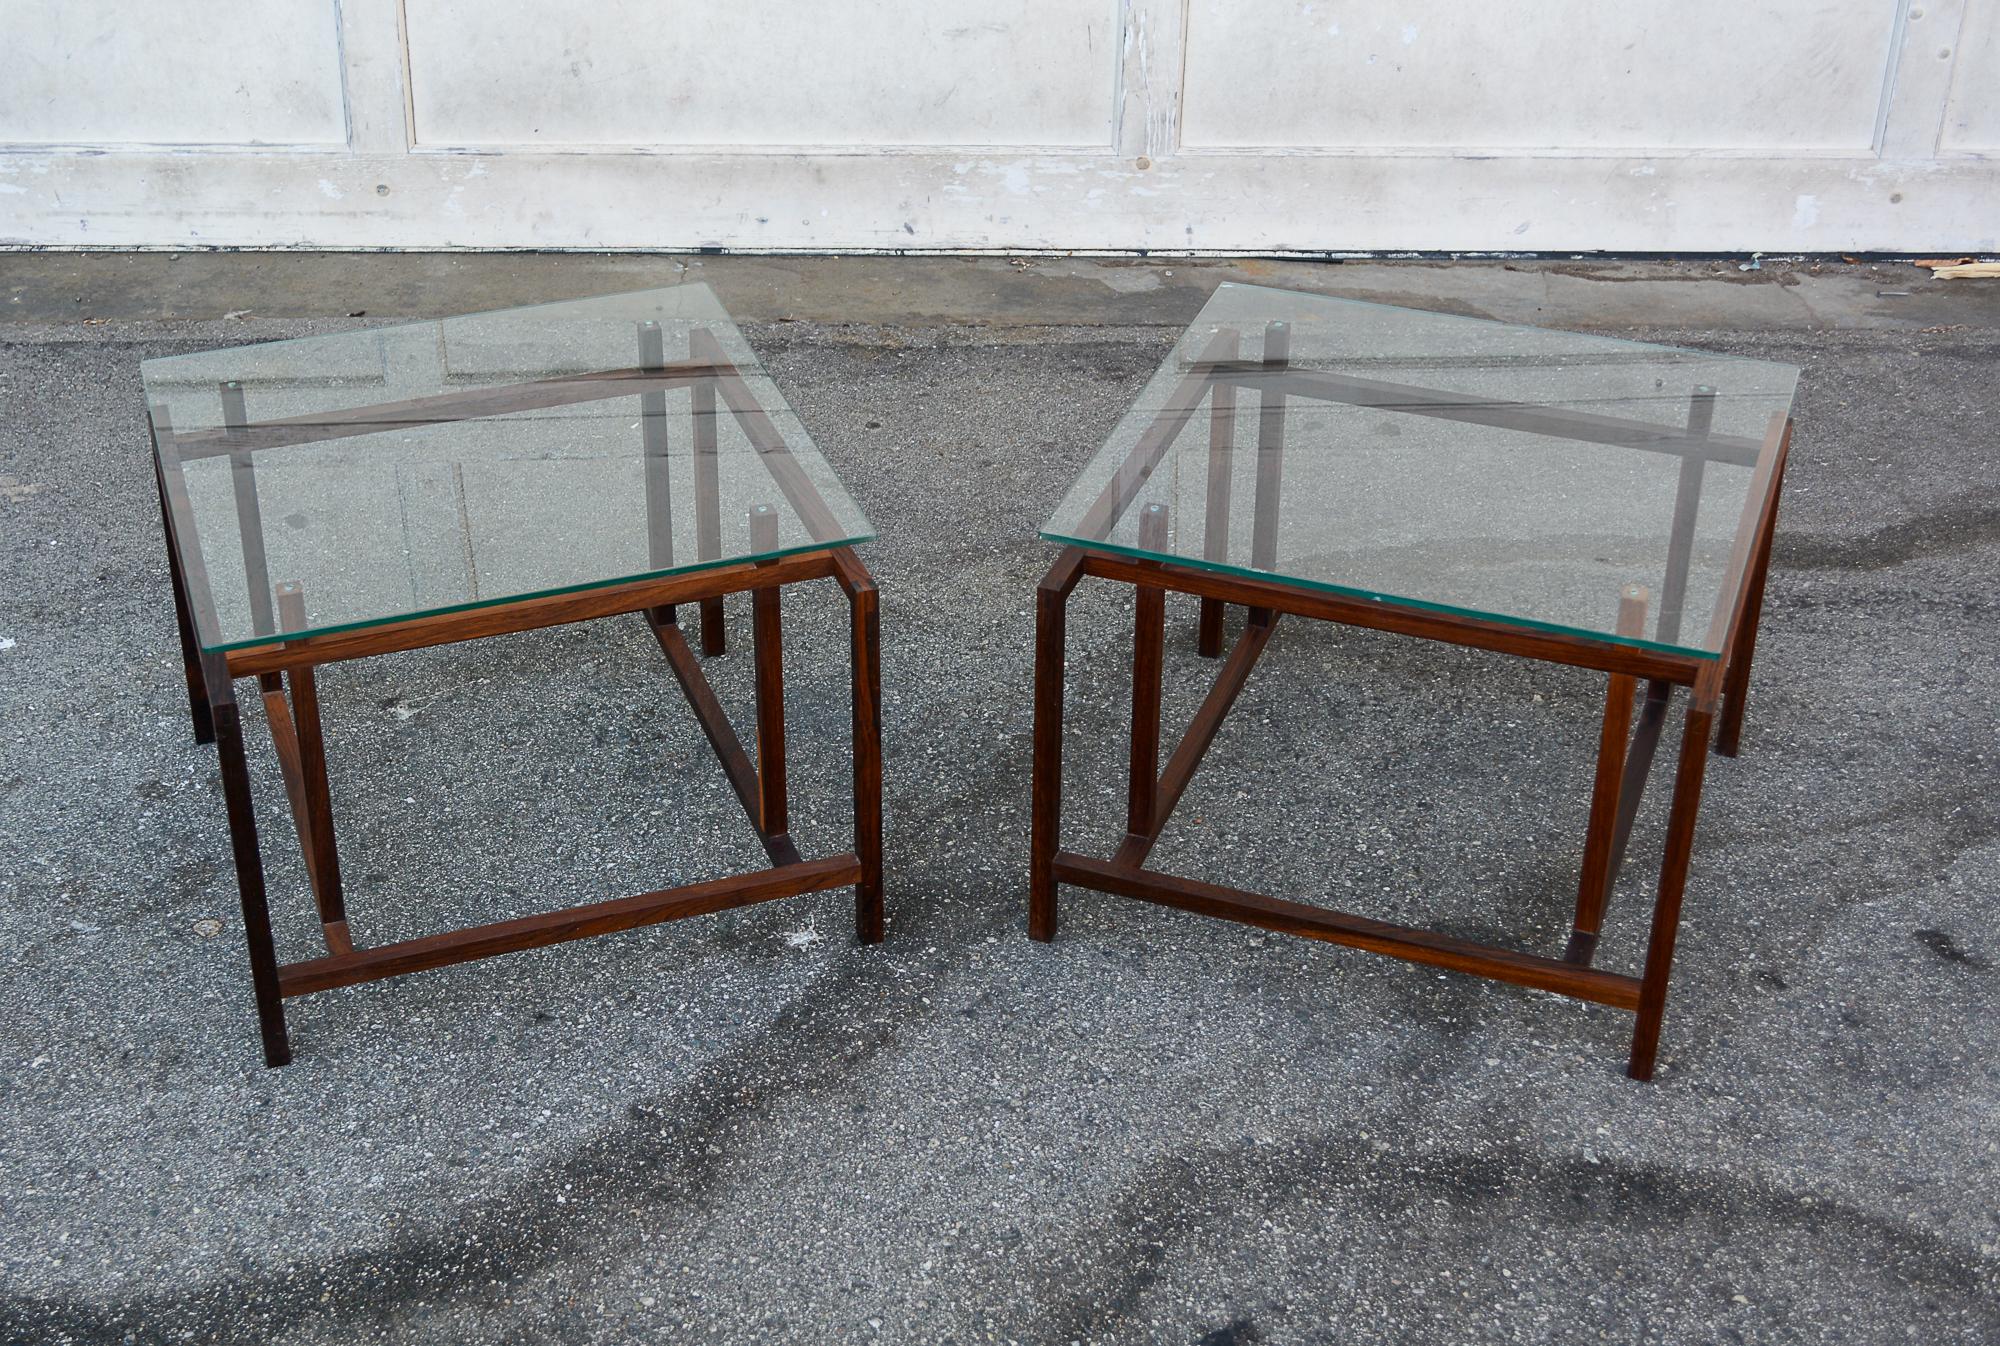 Pair of rosewood and glass end tables designed by Henning Norgaard. The frames are solid Brazilian rosewood. These are in original condition. The glass top on one table has a few small chips to the edges. There is a small crack in one wood piece.